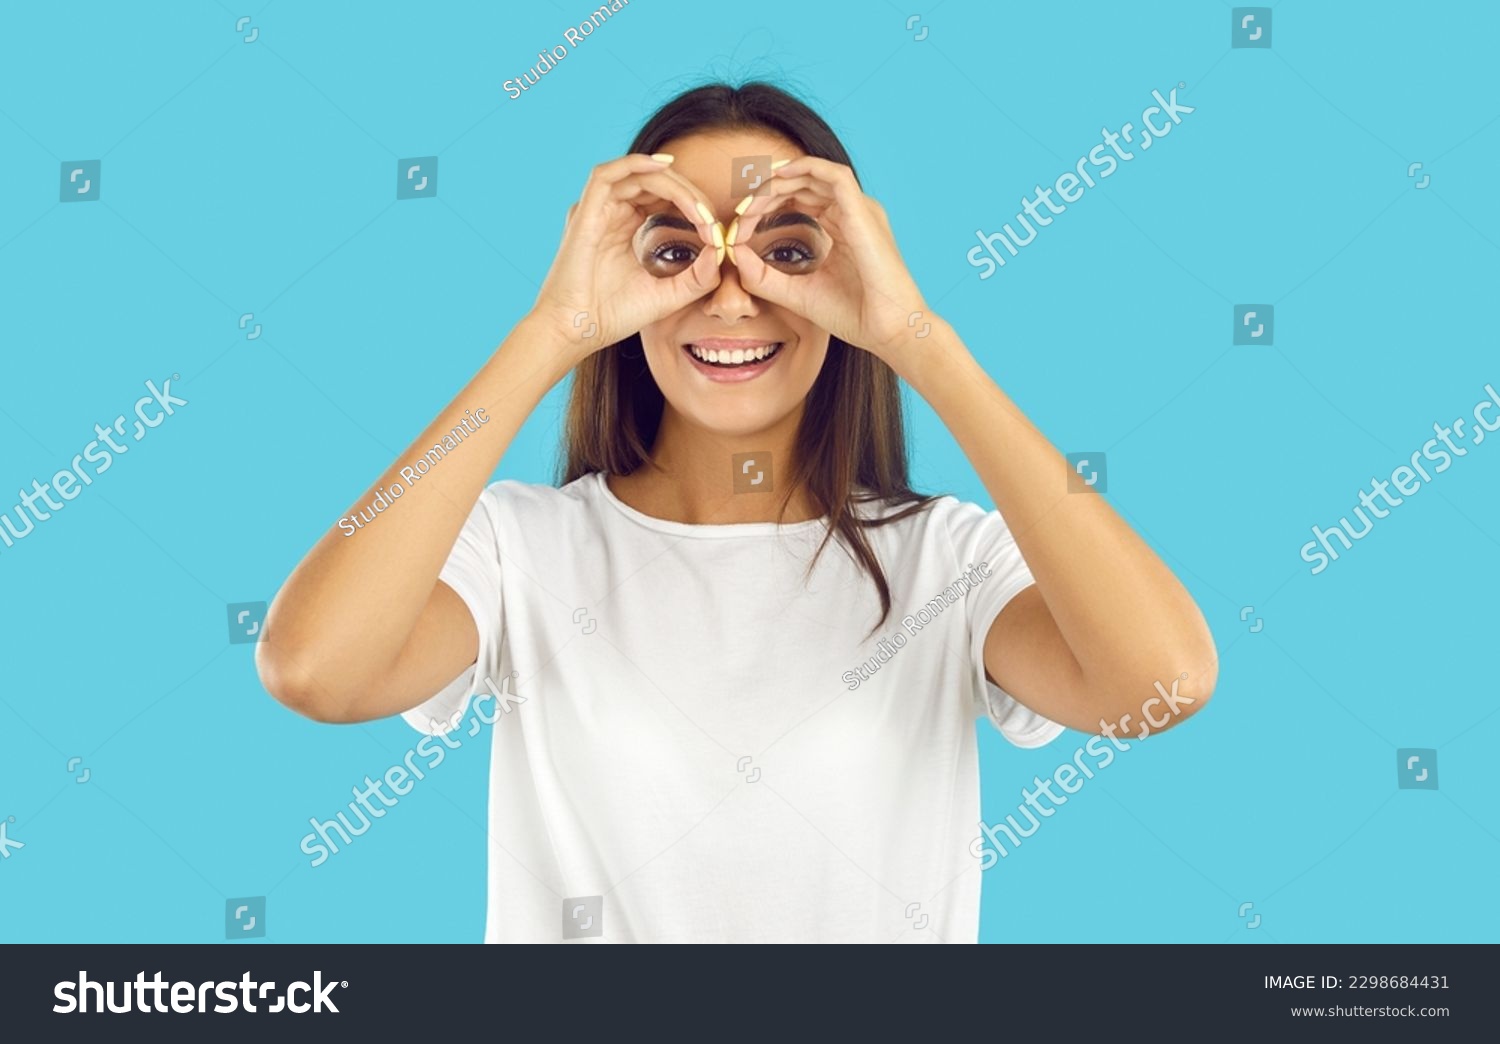 Happy pretty woman looking through pretend binoculars. Cheerful beautiful young brunette lady in white T shirt forming circles with her hands, doing binoculars gesture, looking in distance and smiling #2298684431